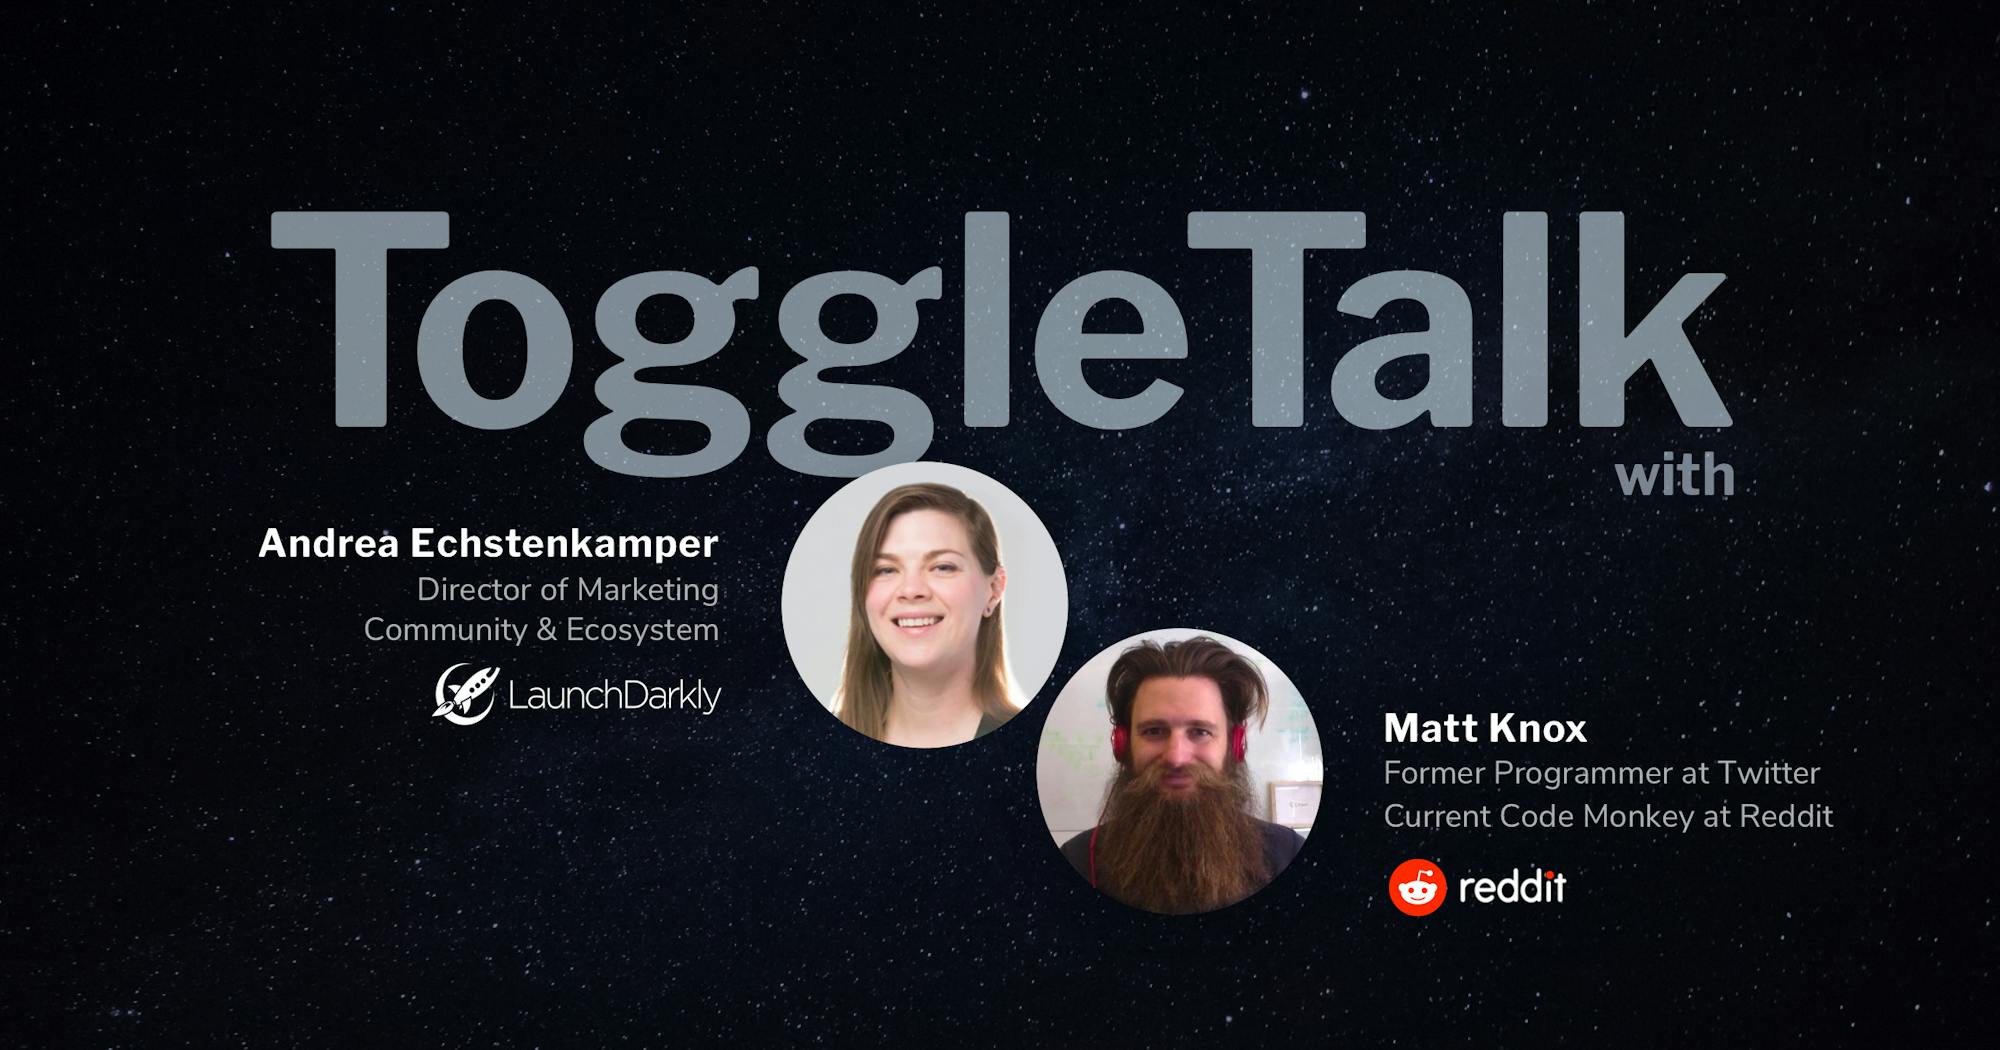 Toggle Talk with Matt Knox, Twitter 2009-2014, Reddit 2017-Now featured image